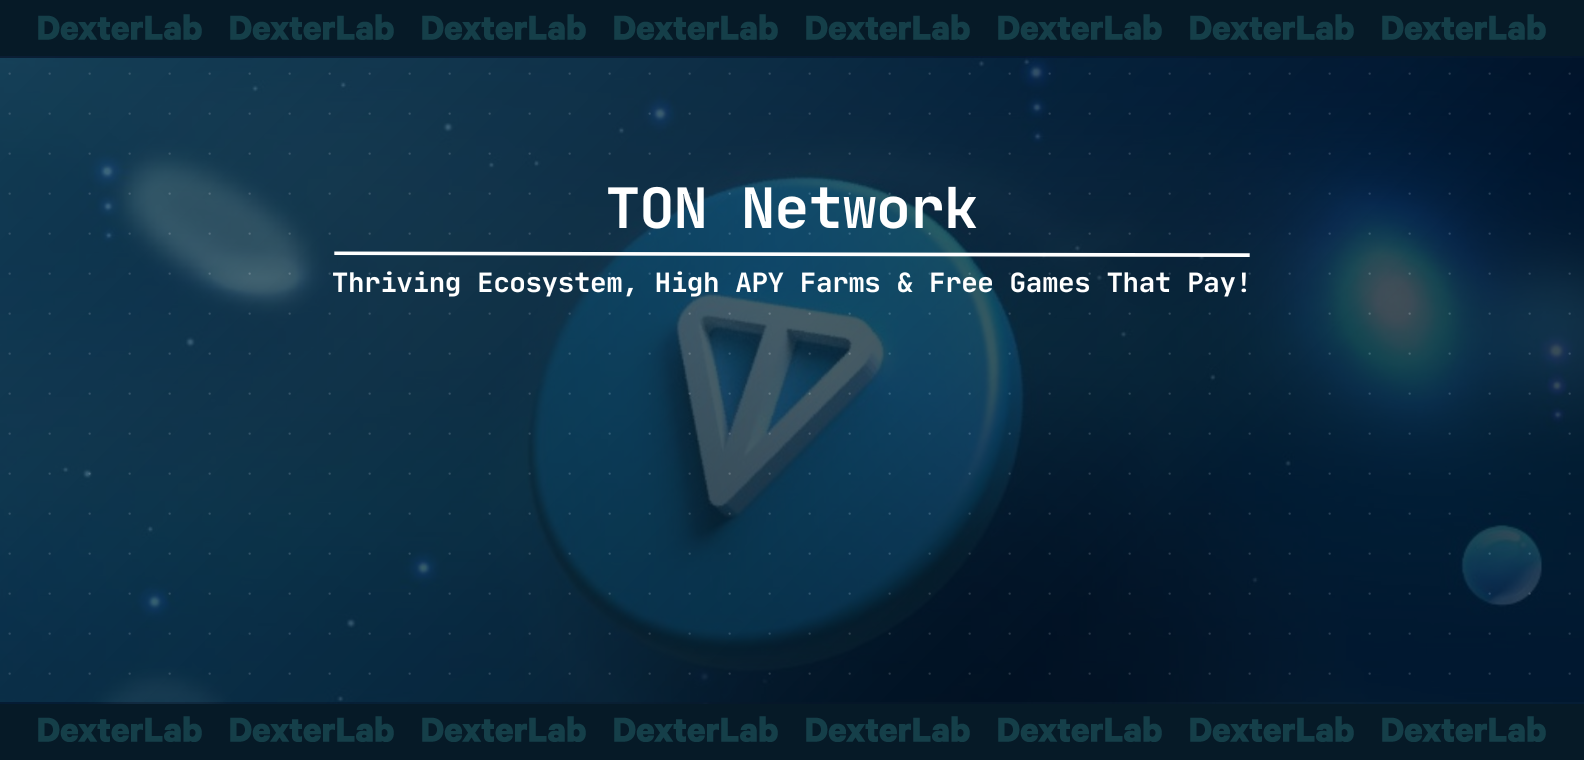 TON Network: Thriving Ecosystem, High APY Farms & Free Games That Pay!